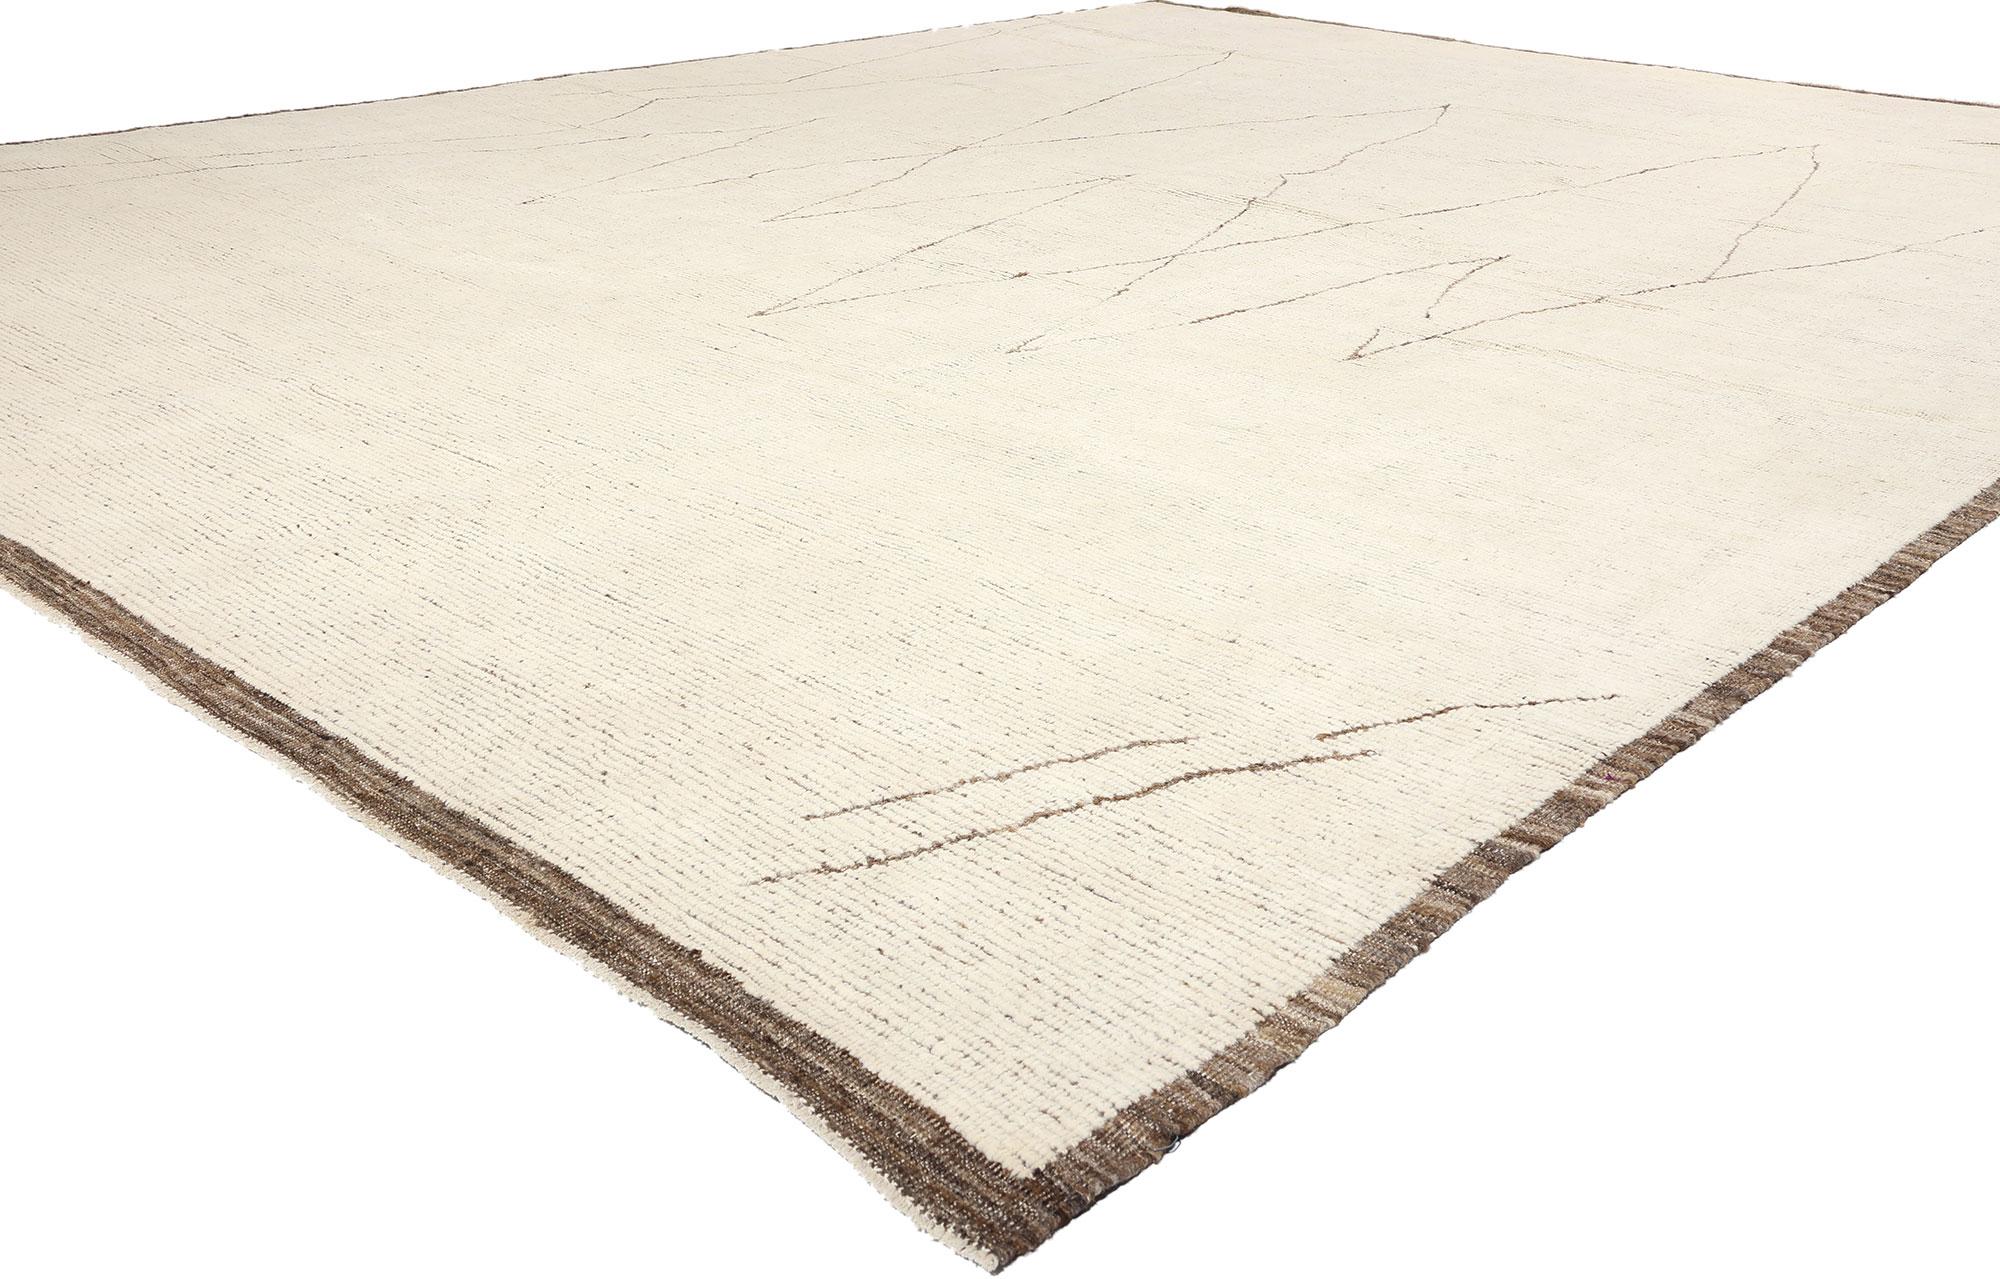 81081 Organic Modern Wabi-Sabi Moroccan Rug, 13'03 x 16'10. Enveloped in cozy cohesiveness and tribal enchantment, lies an extraordinary focal point — an oversized hand-knotted wool Organic Modern Wabi-Sabi Moroccan rug, spanning nearly 13 by 17